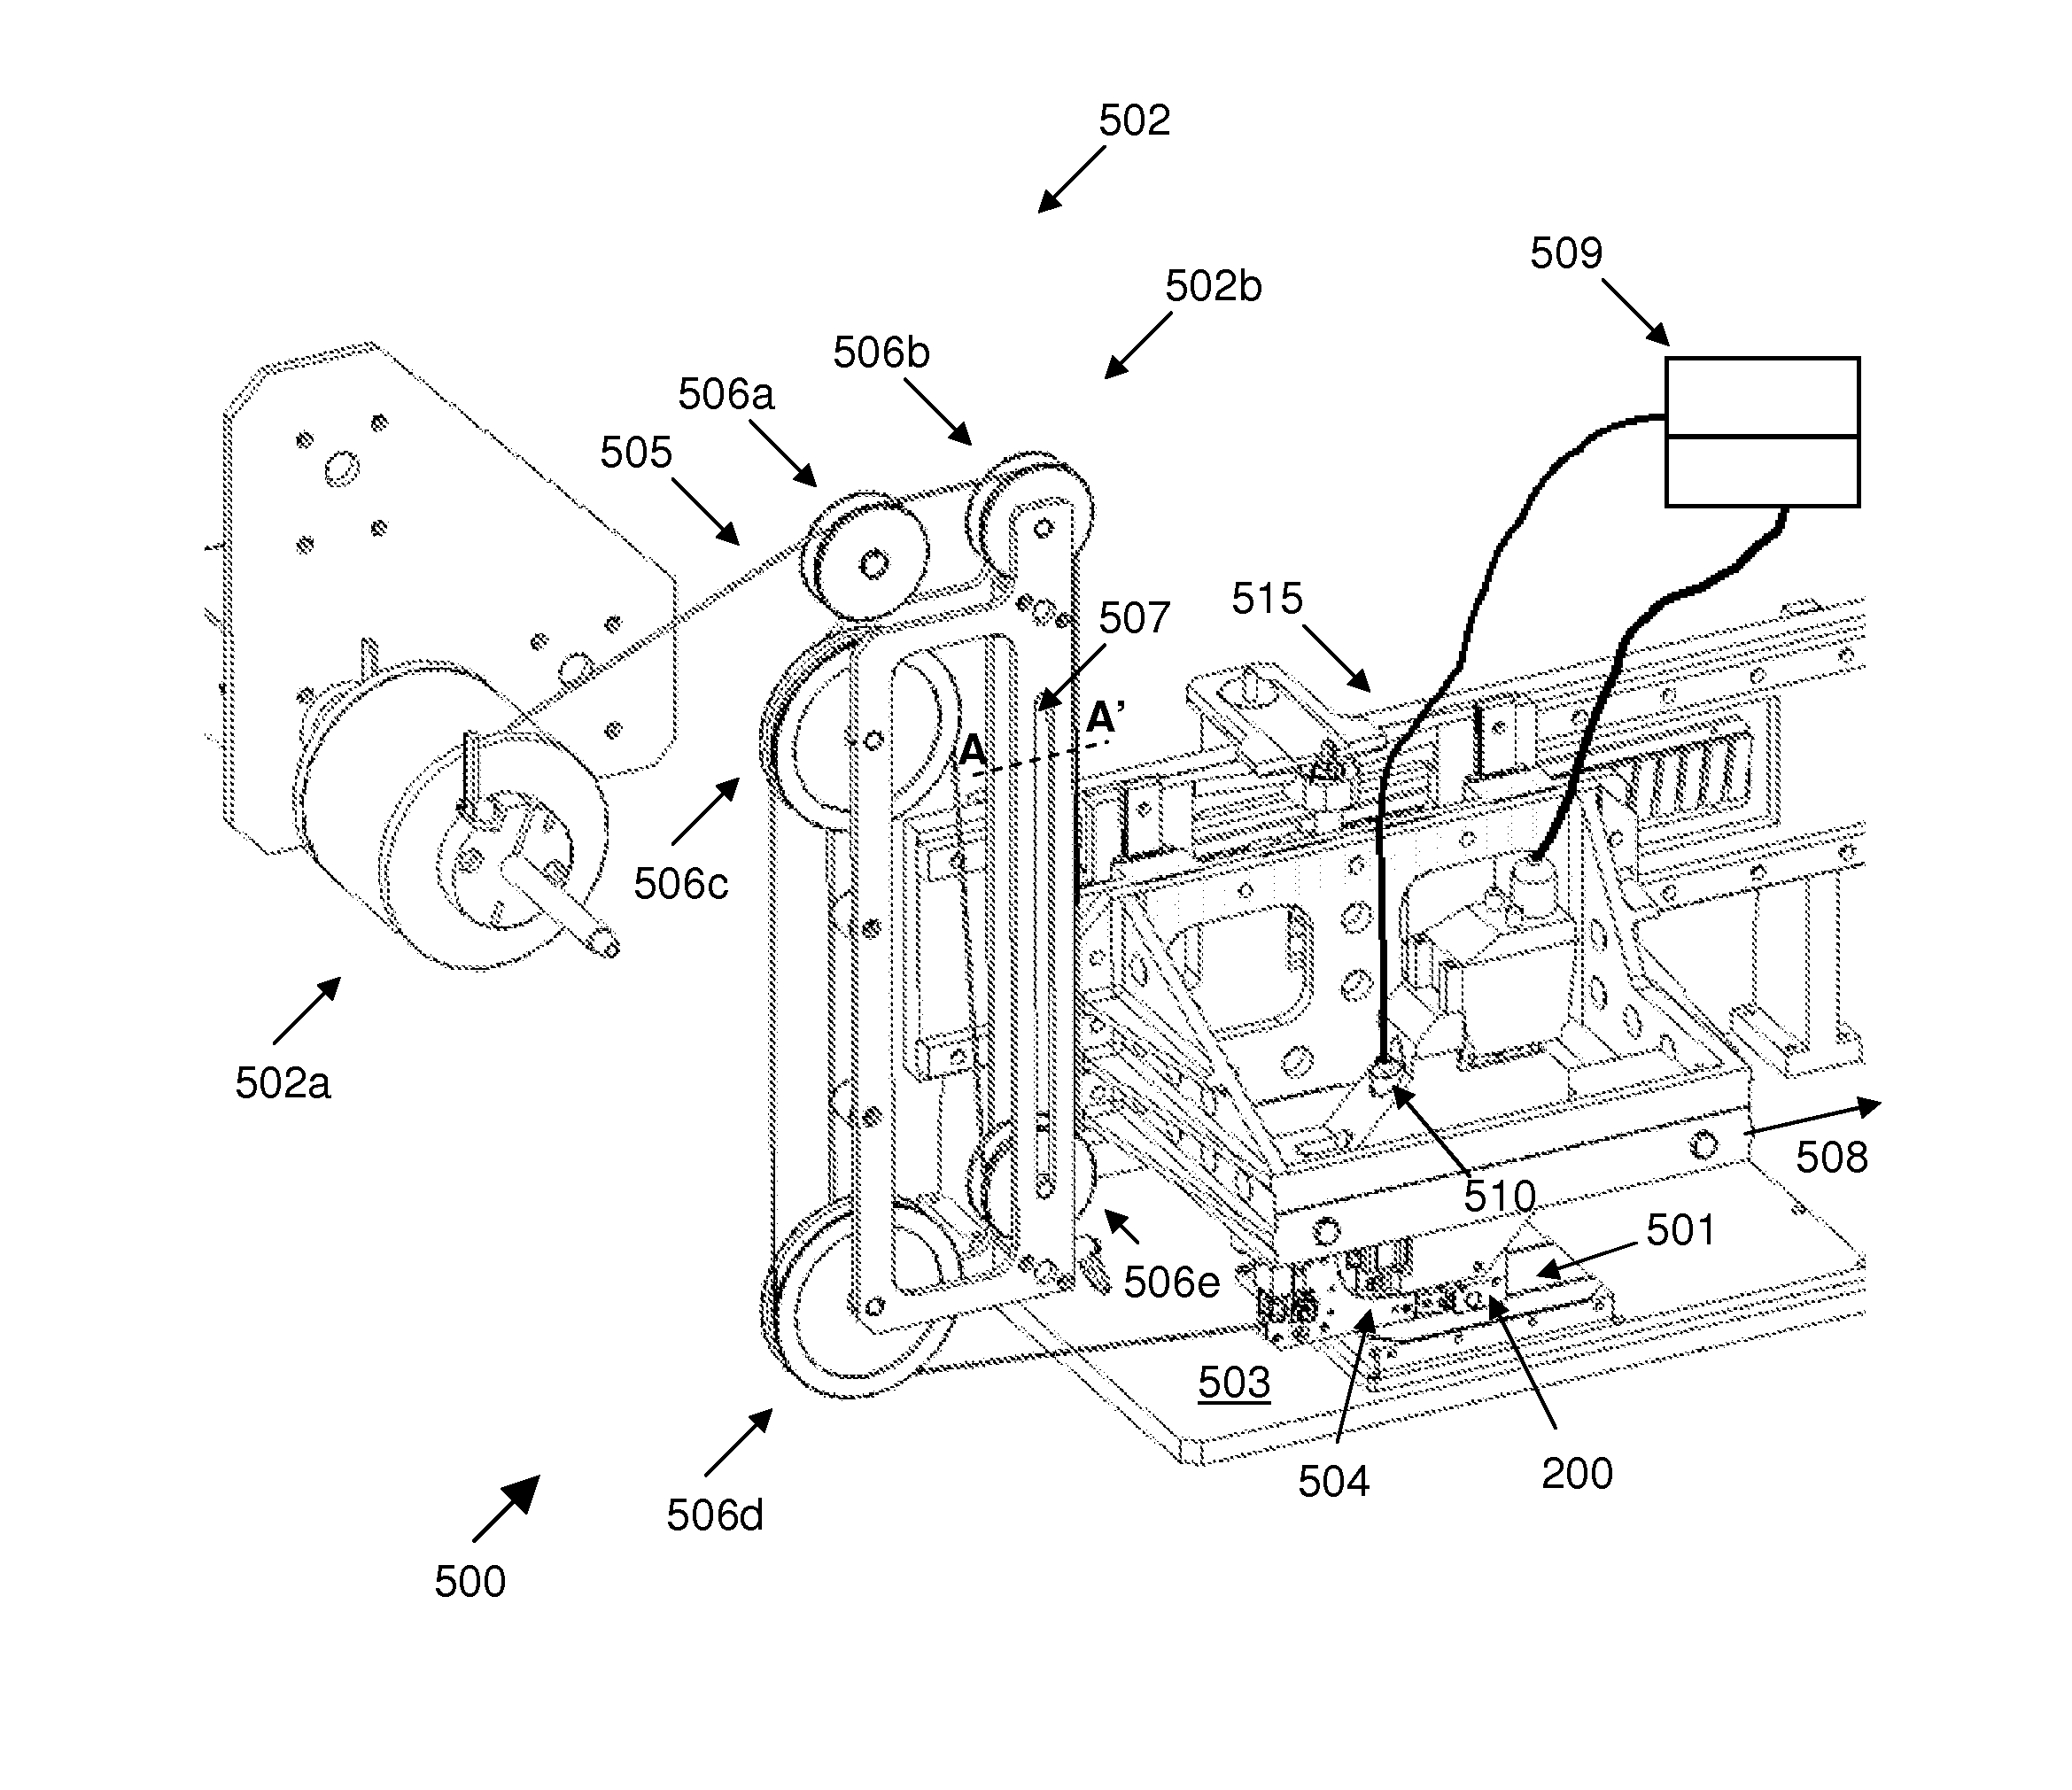 Apparatus and method of interconnecting a plurality of solar cells